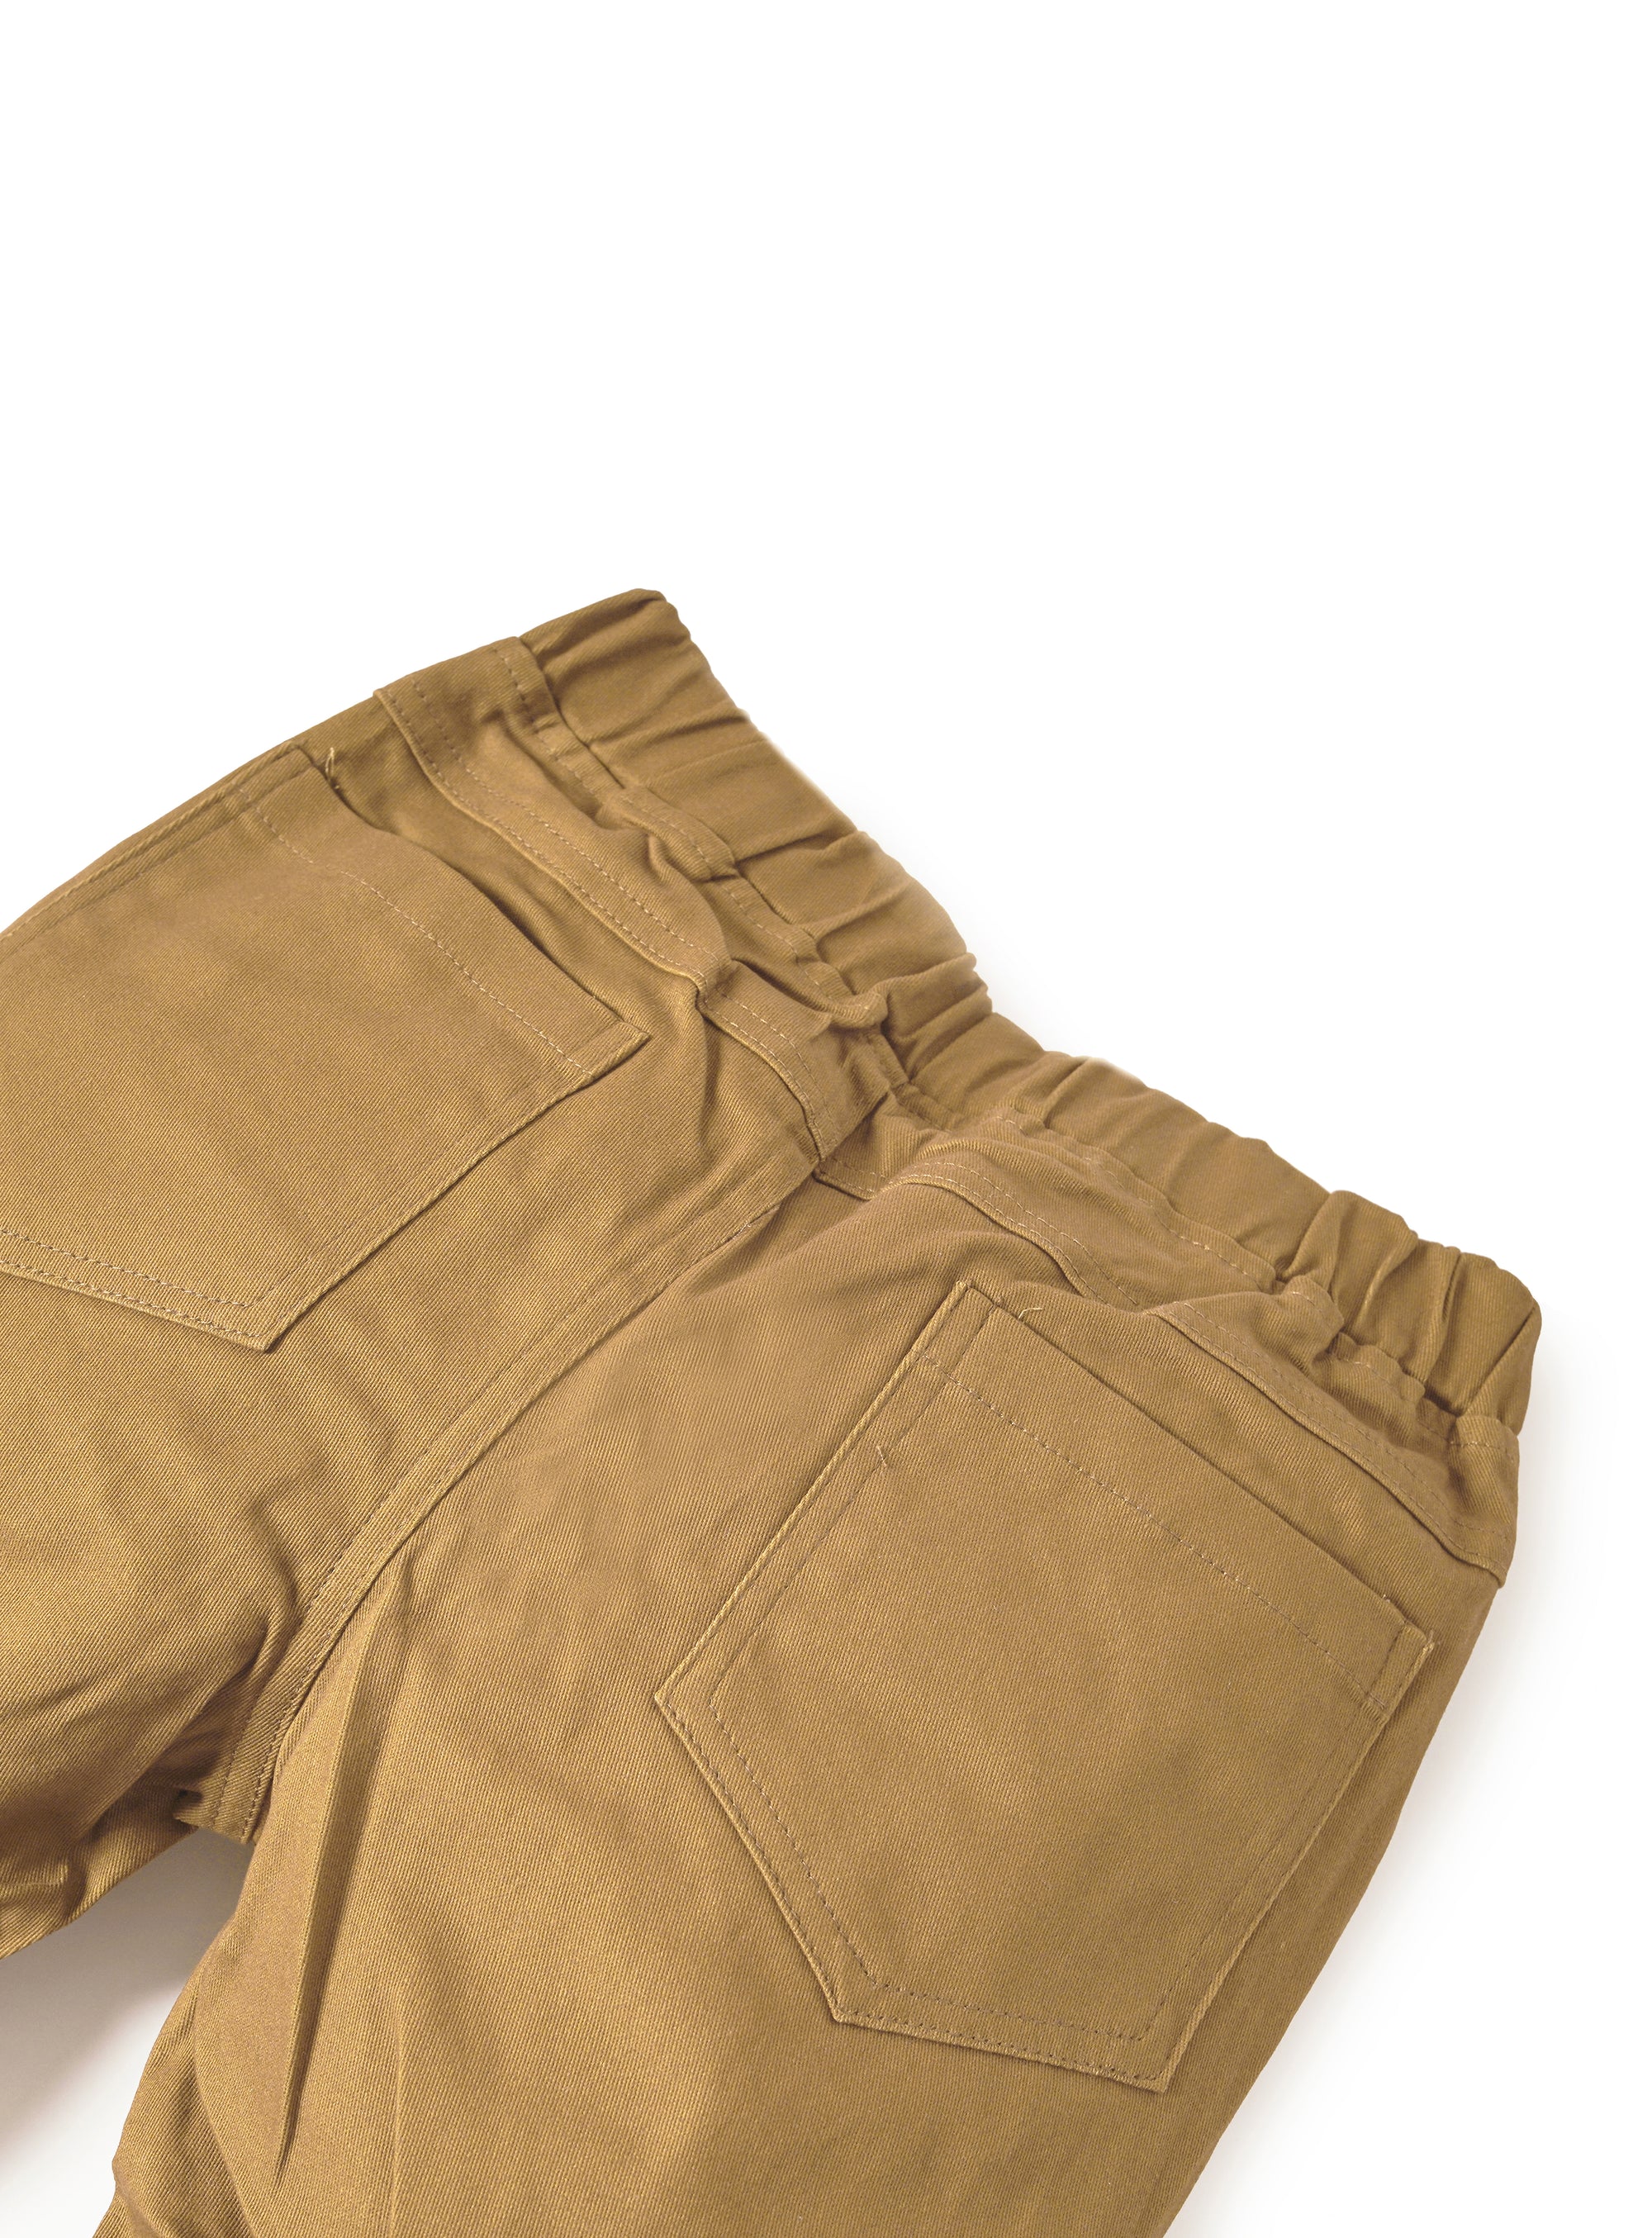 peanut brown chinos with stretchable waist